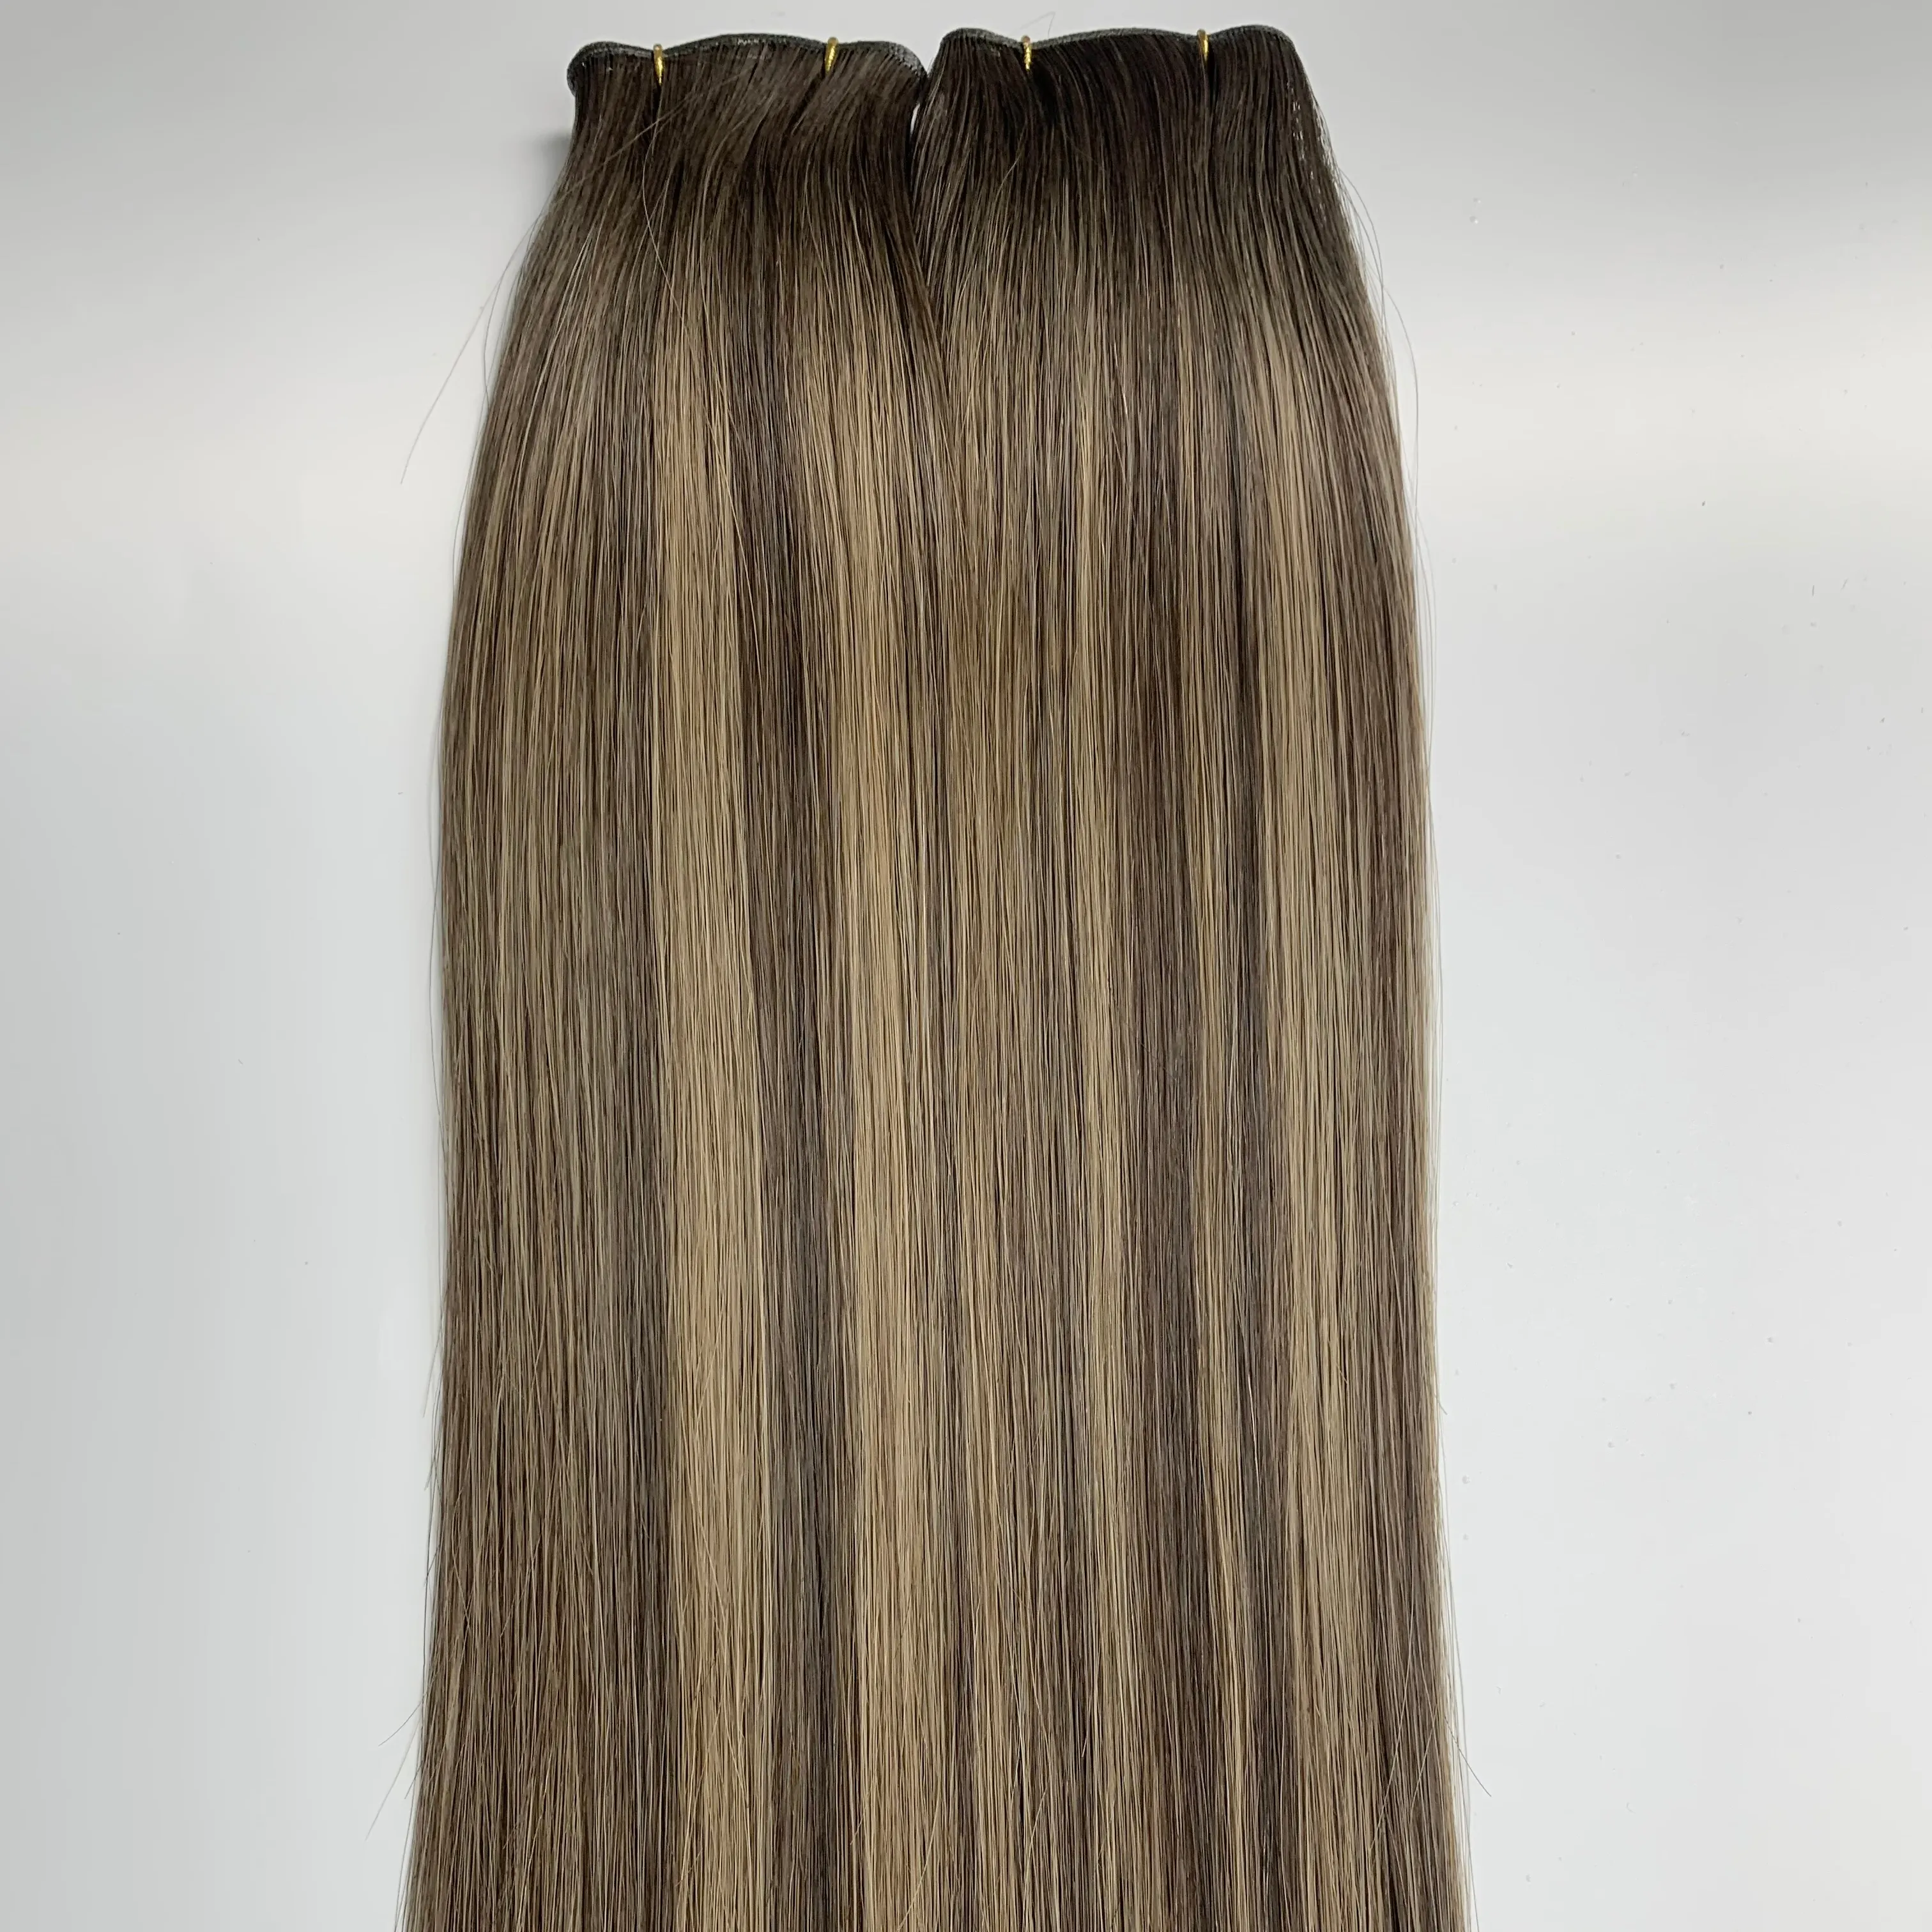 High Quality Russian 100% Human Hair Virgin Remy Super Slim New Hand Tied Weft Genius Weft Hair Extensions